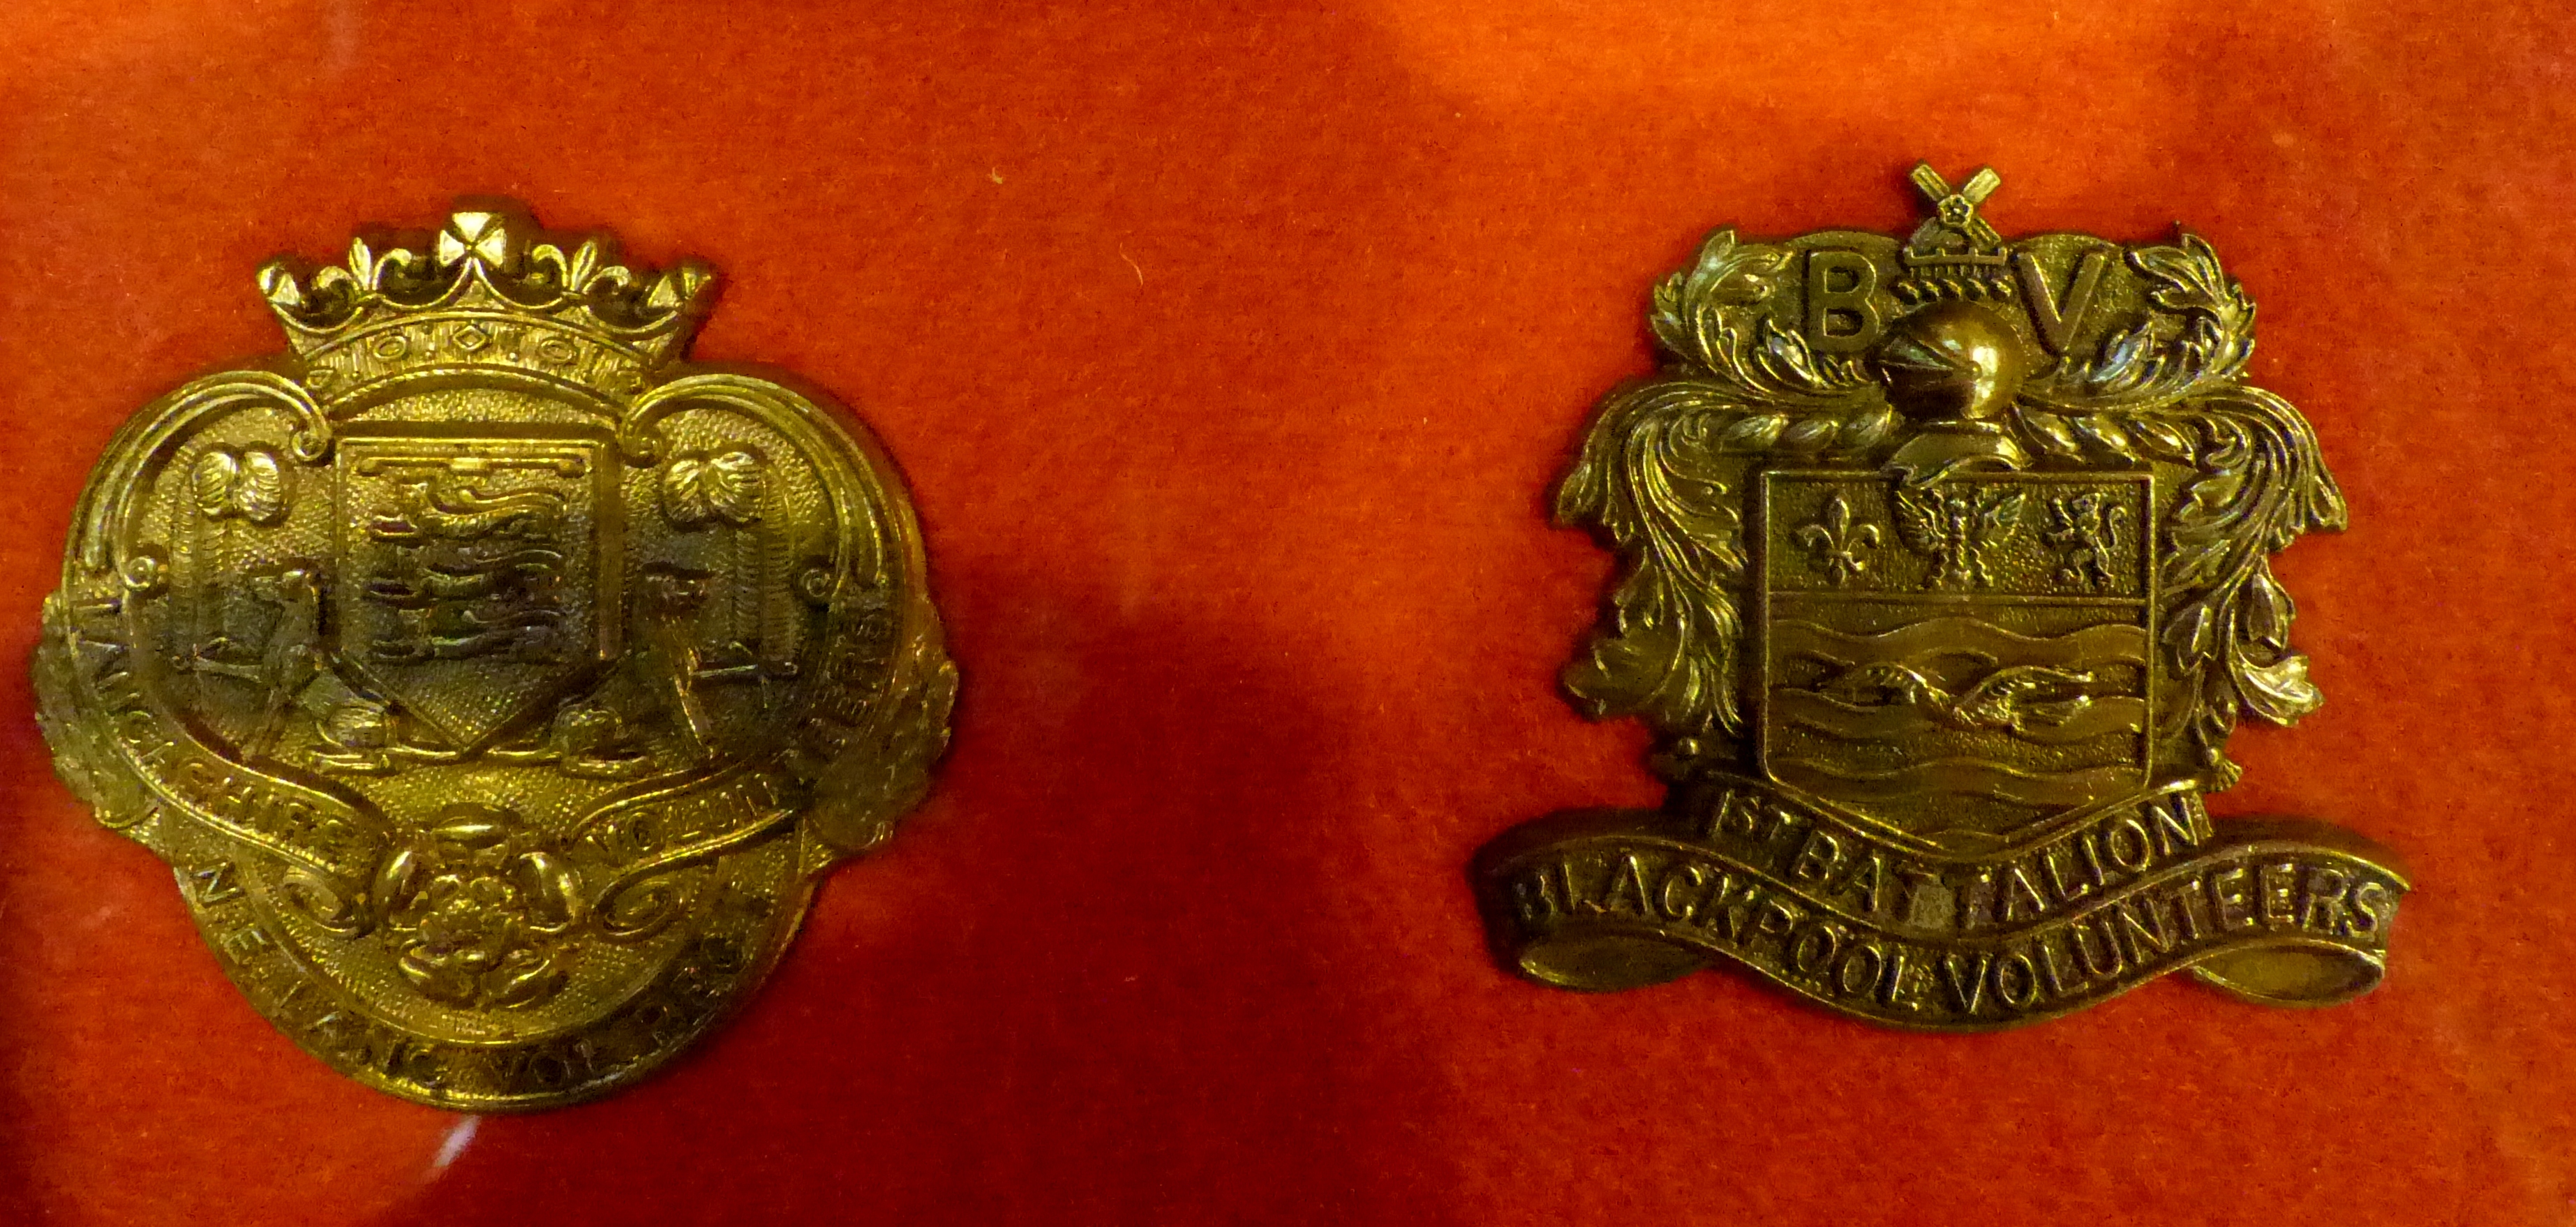 23 military cap badges including 14th Kings Hussars, - Image 3 of 3